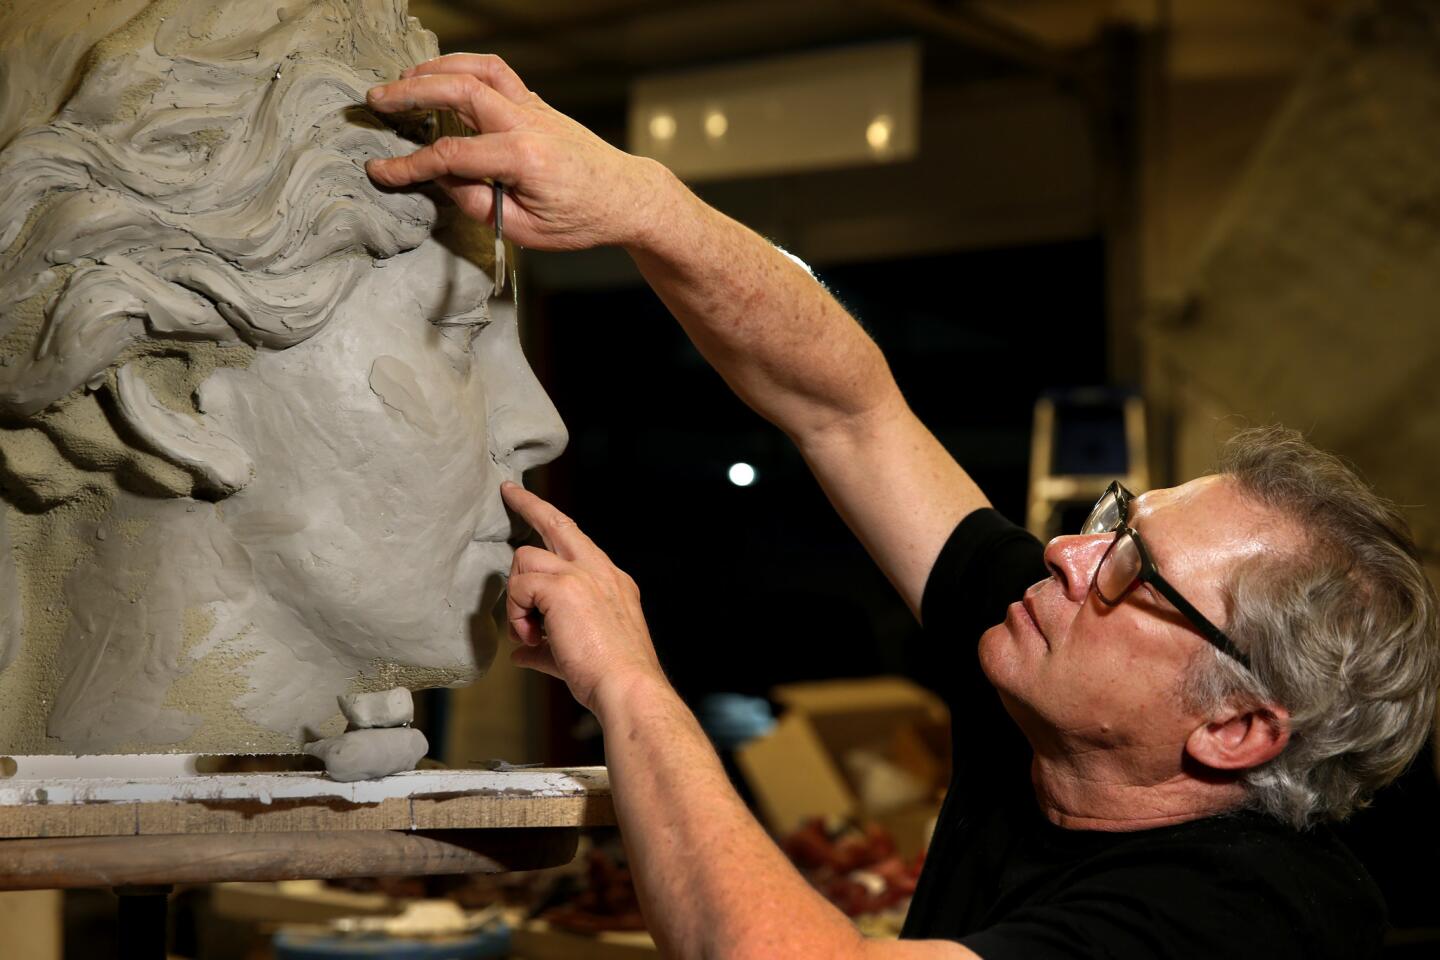 Sculptor Christopher Slatoff works on a full-scale model of Hecuba, queen of Troy, at his studio in Los Angeles.